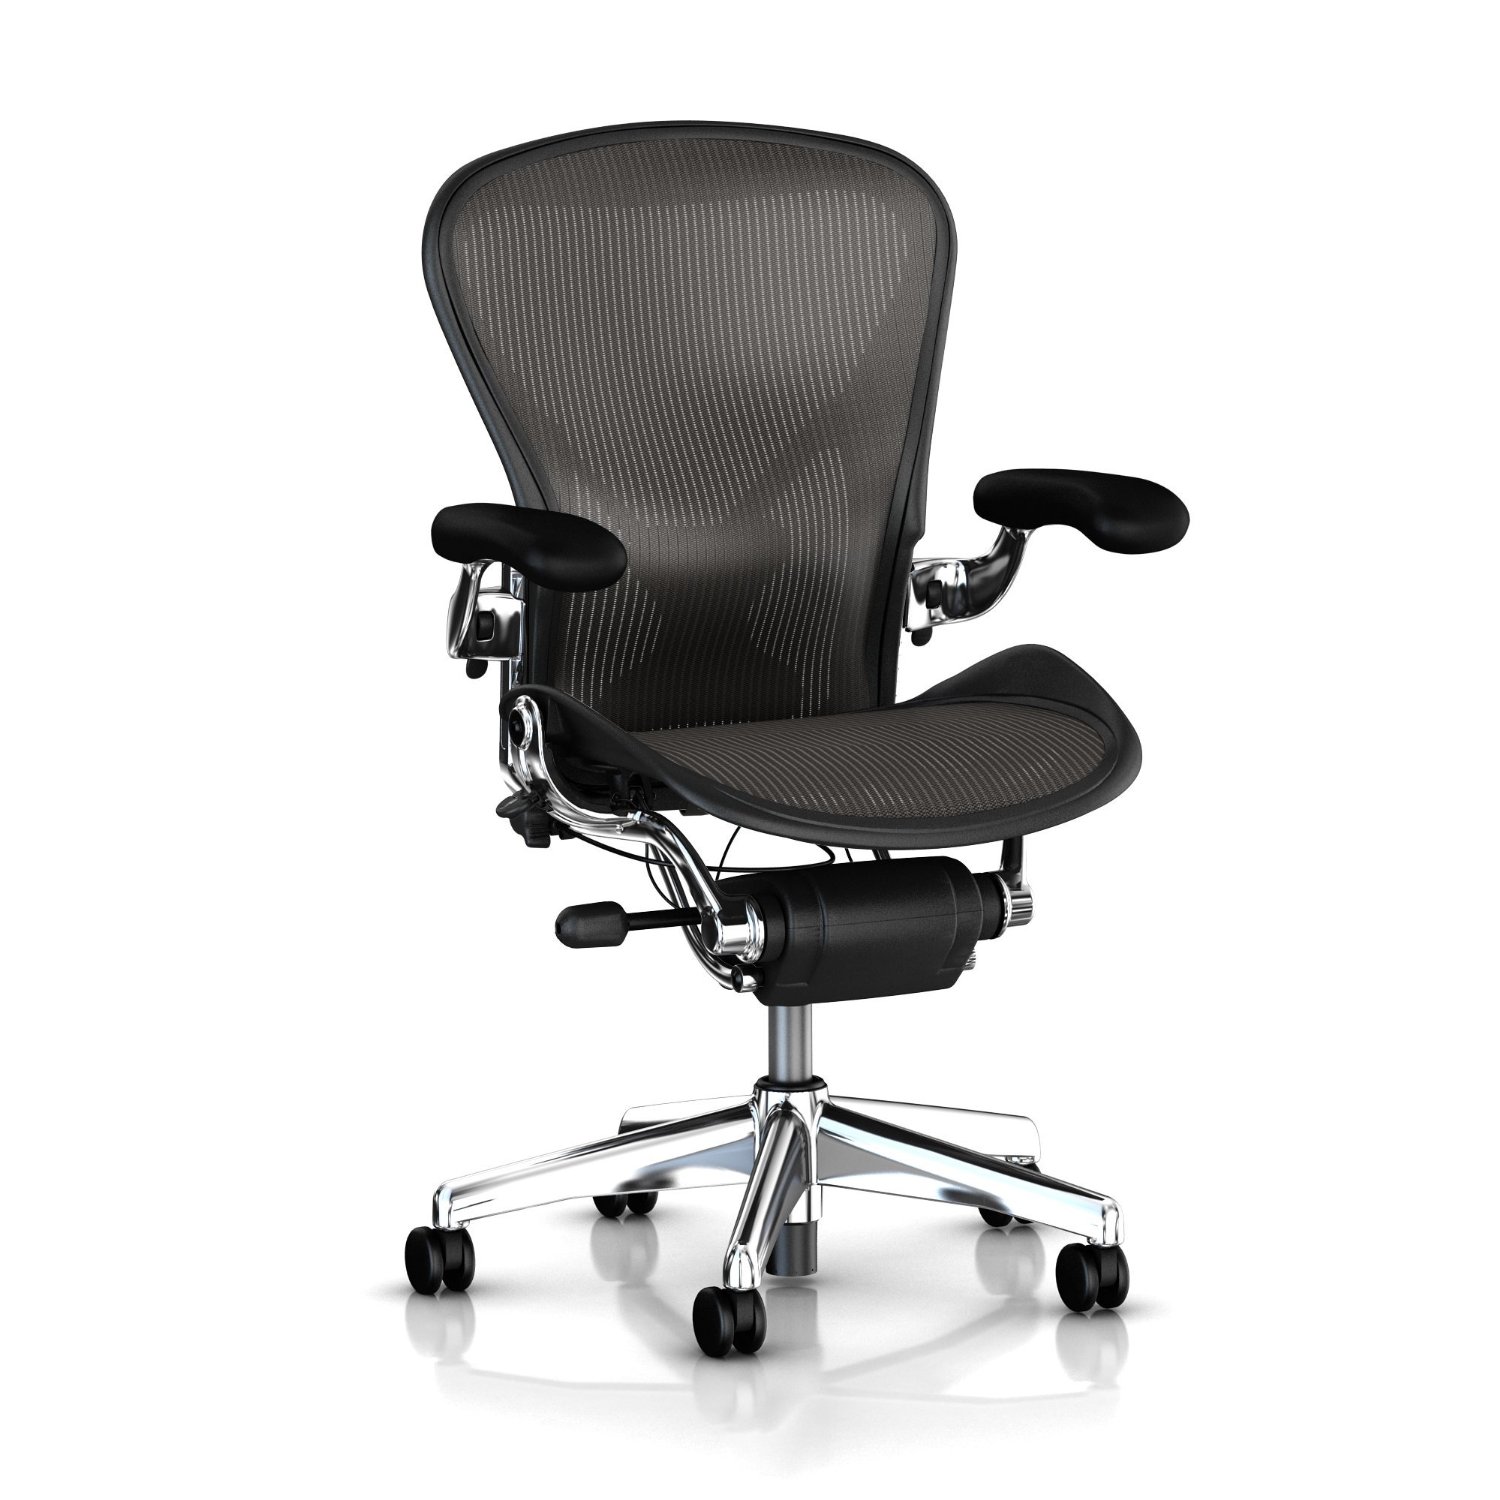 Herman Miller Aeron Chairs: Exclusive and Extremely Comfortable Chairs